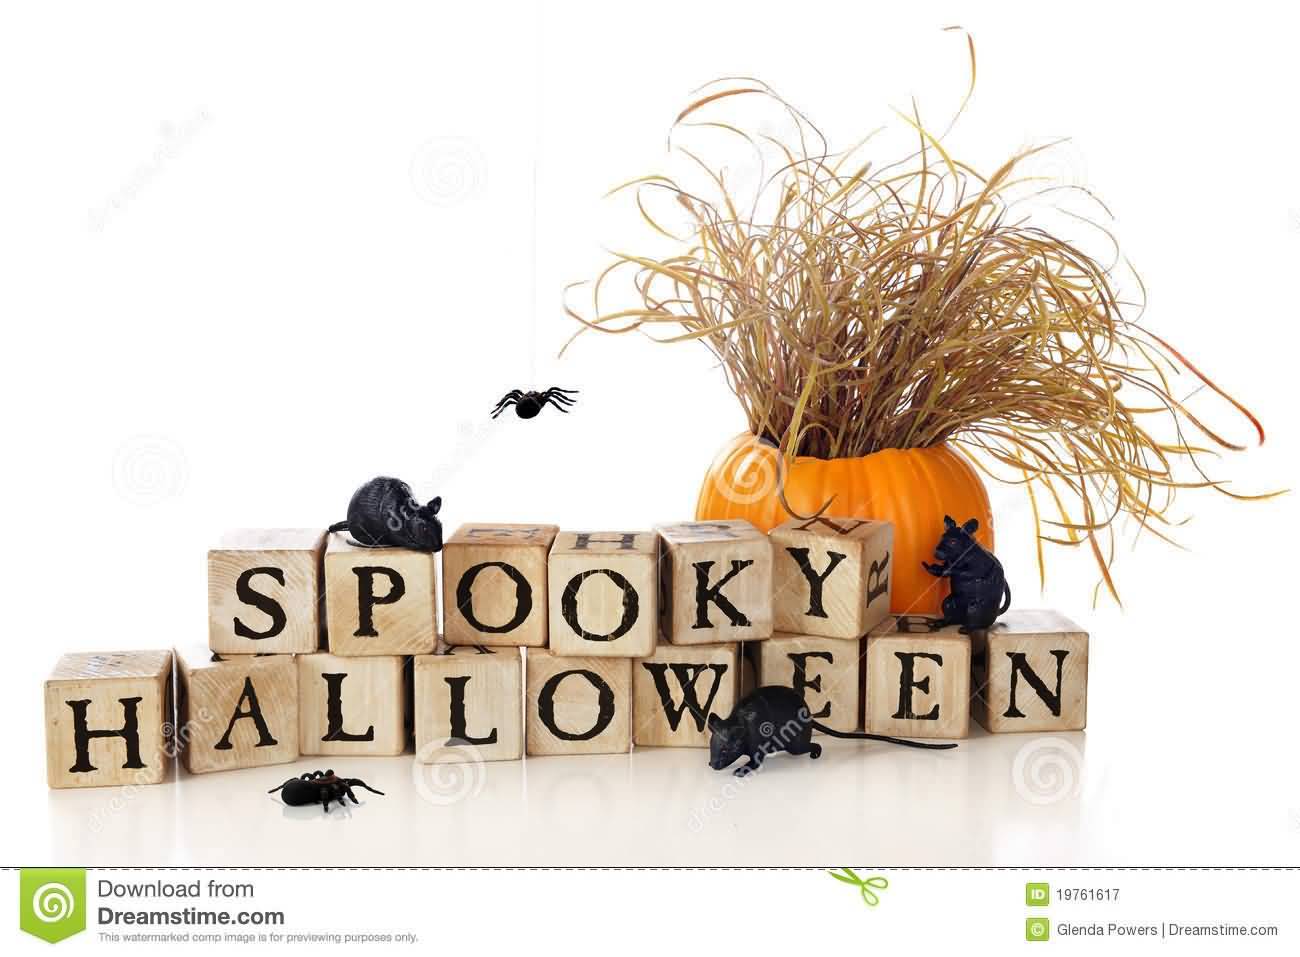 Spooky Halloween Wishes Image